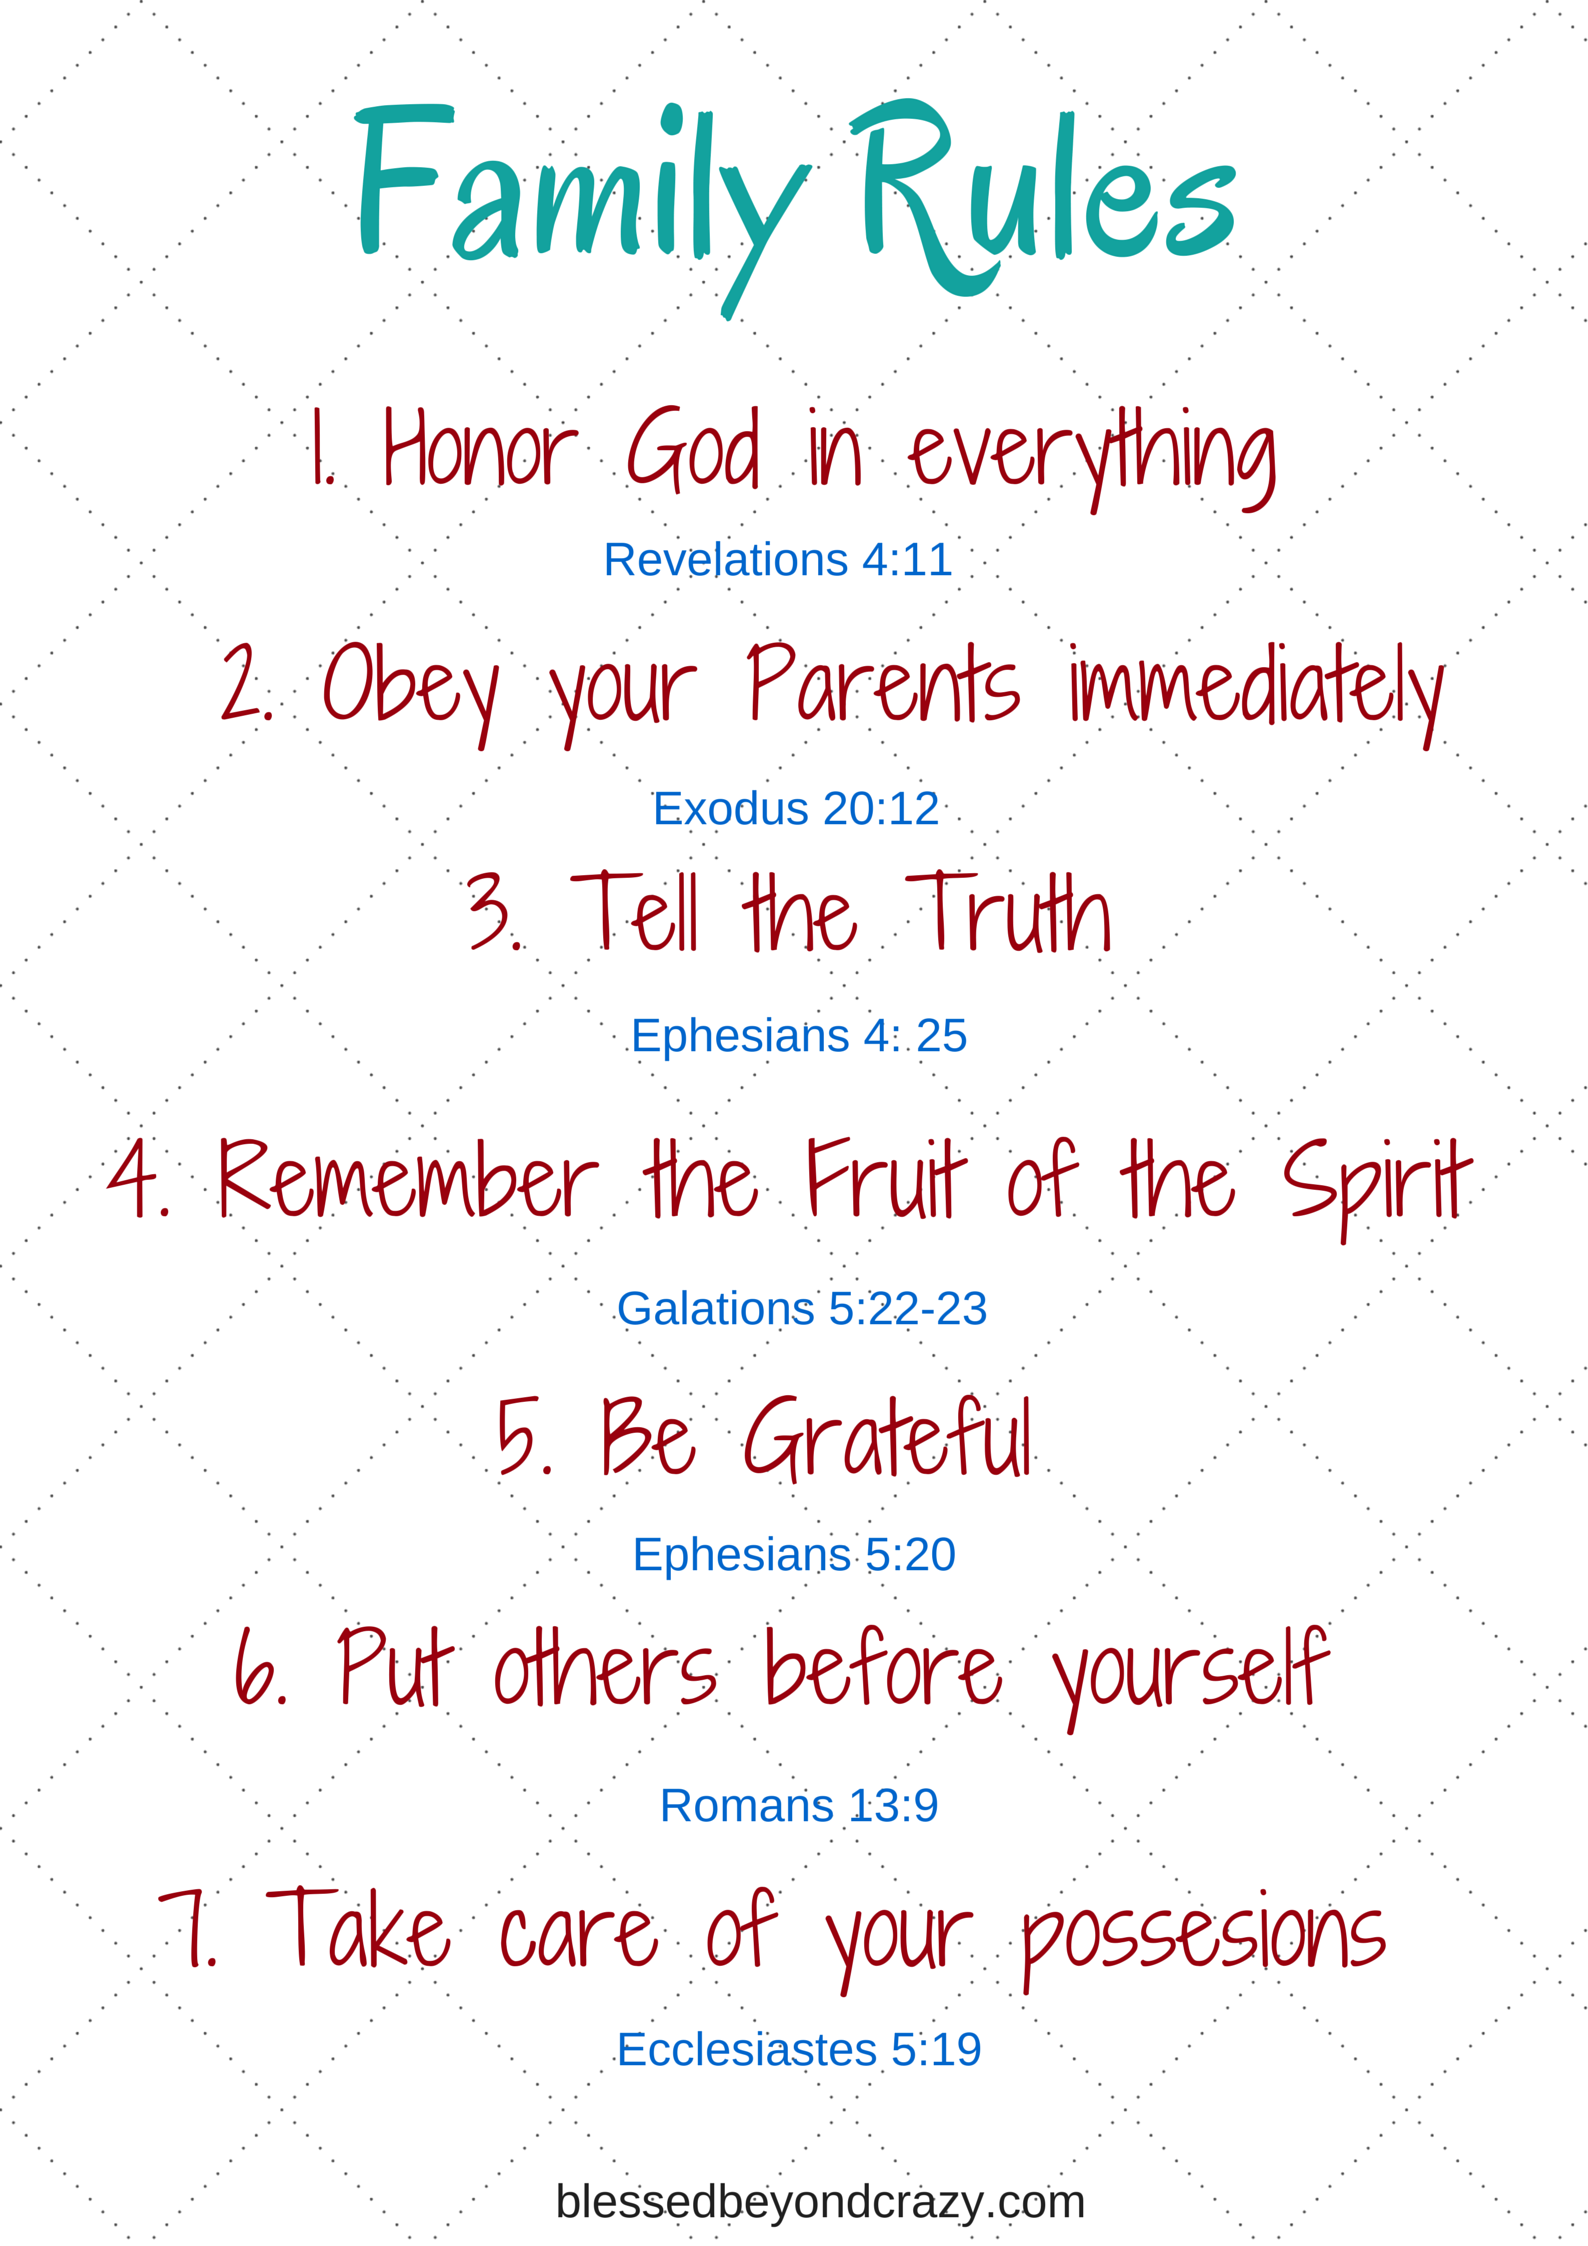 family rules based on biblical truths